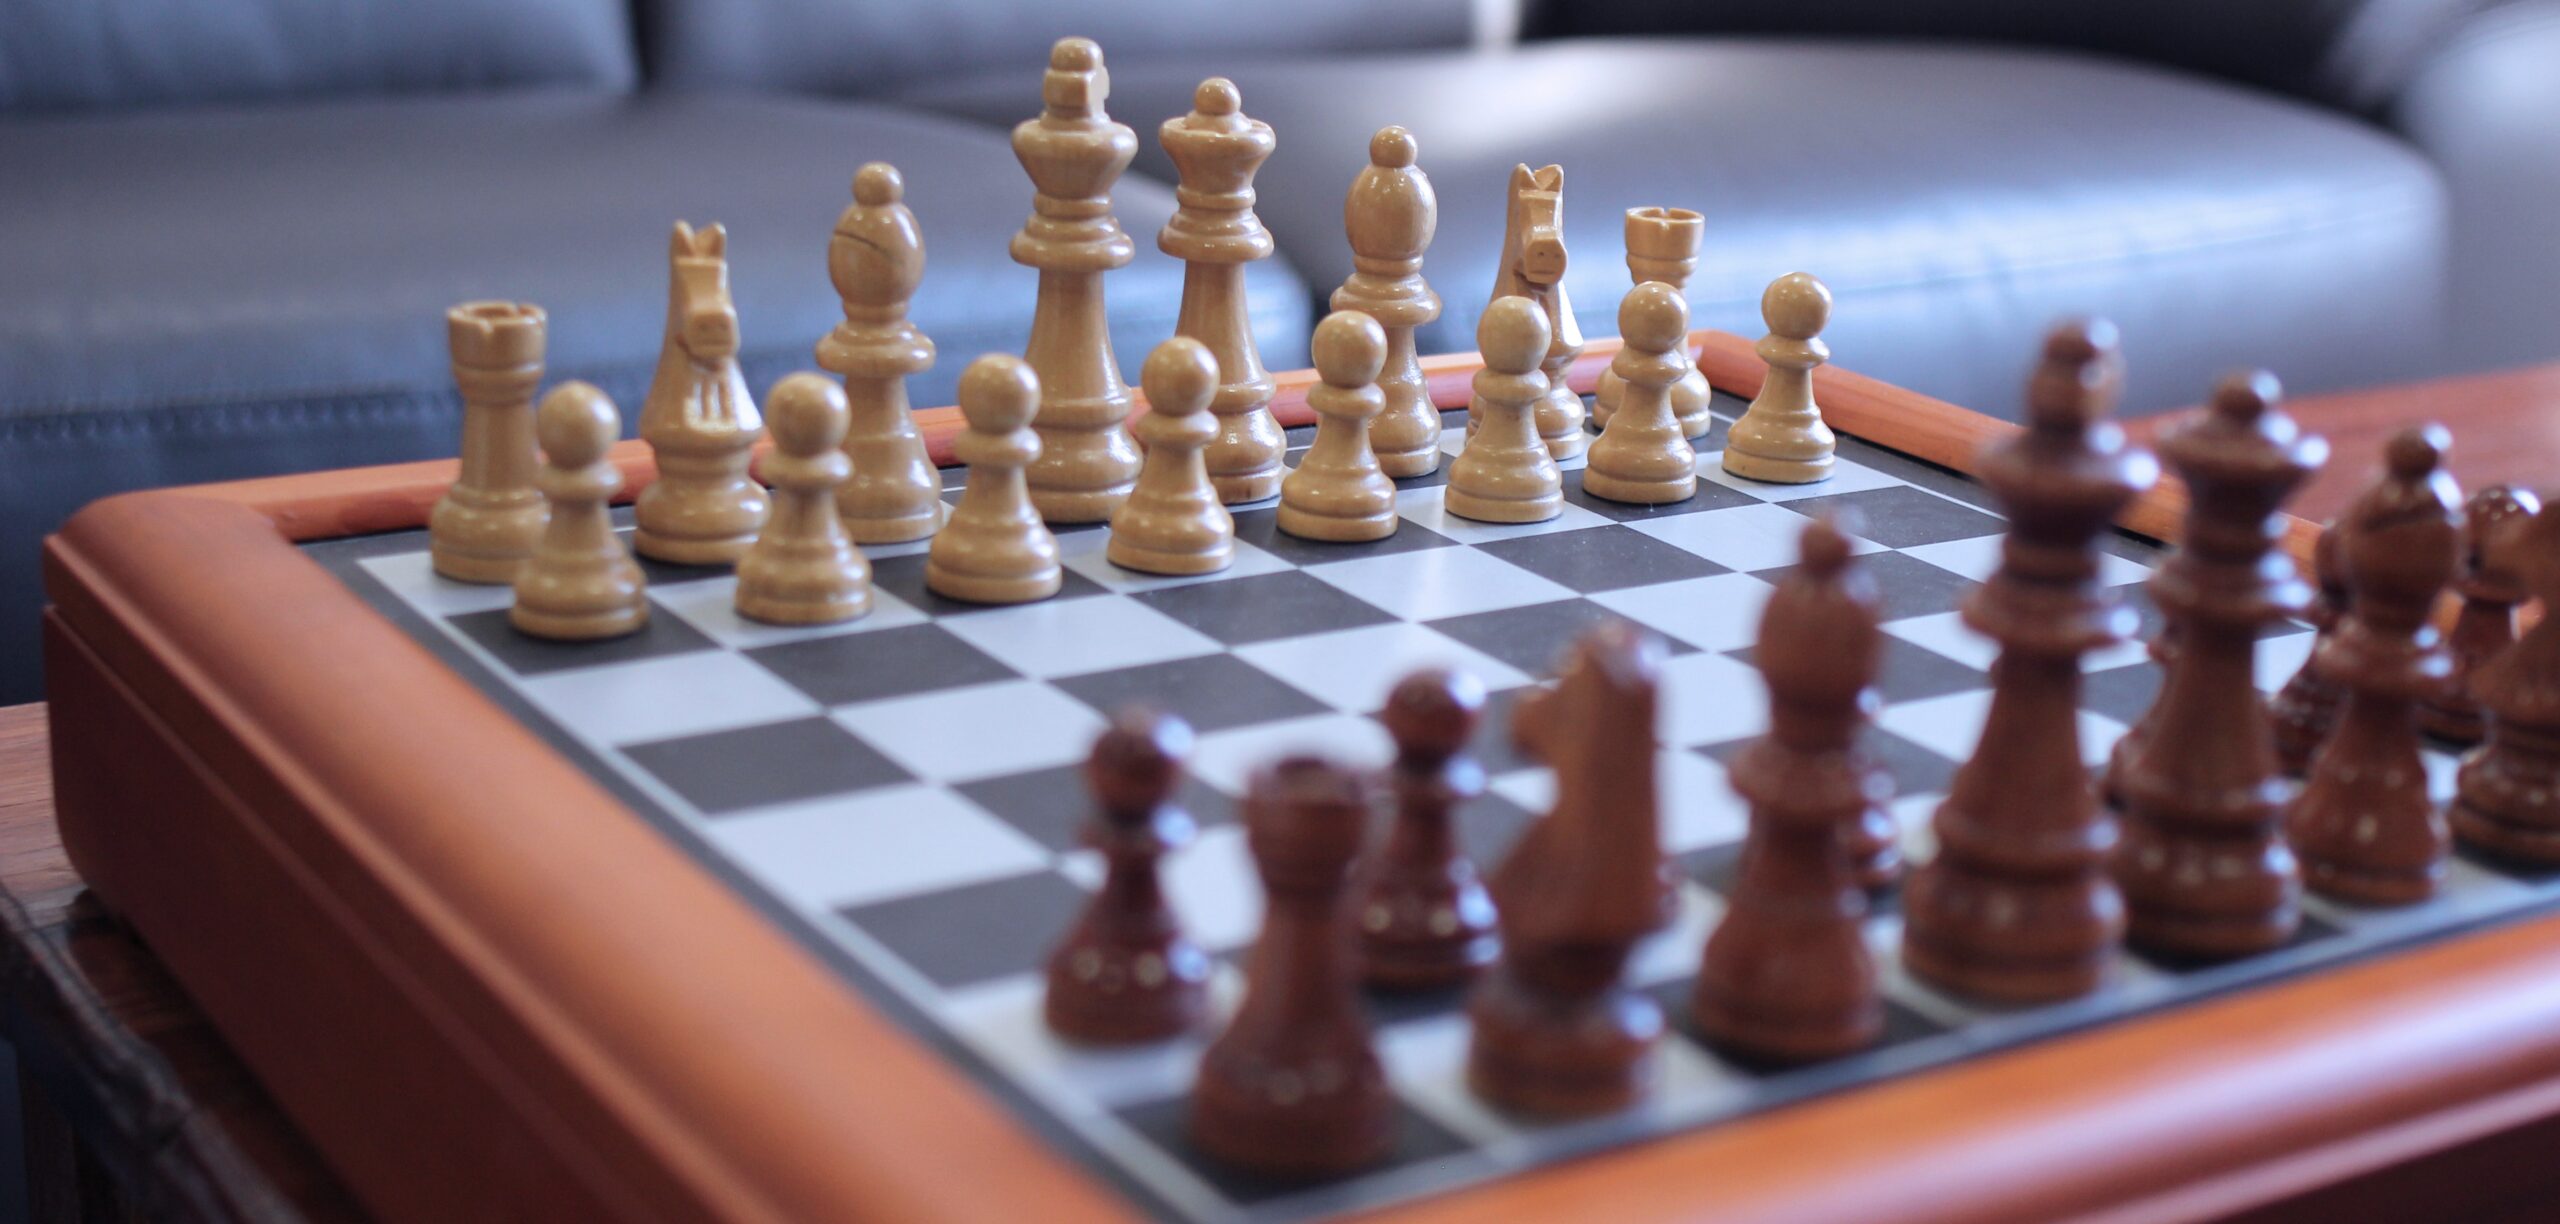 "King's Hunt" strategy, well-structured pawn formation